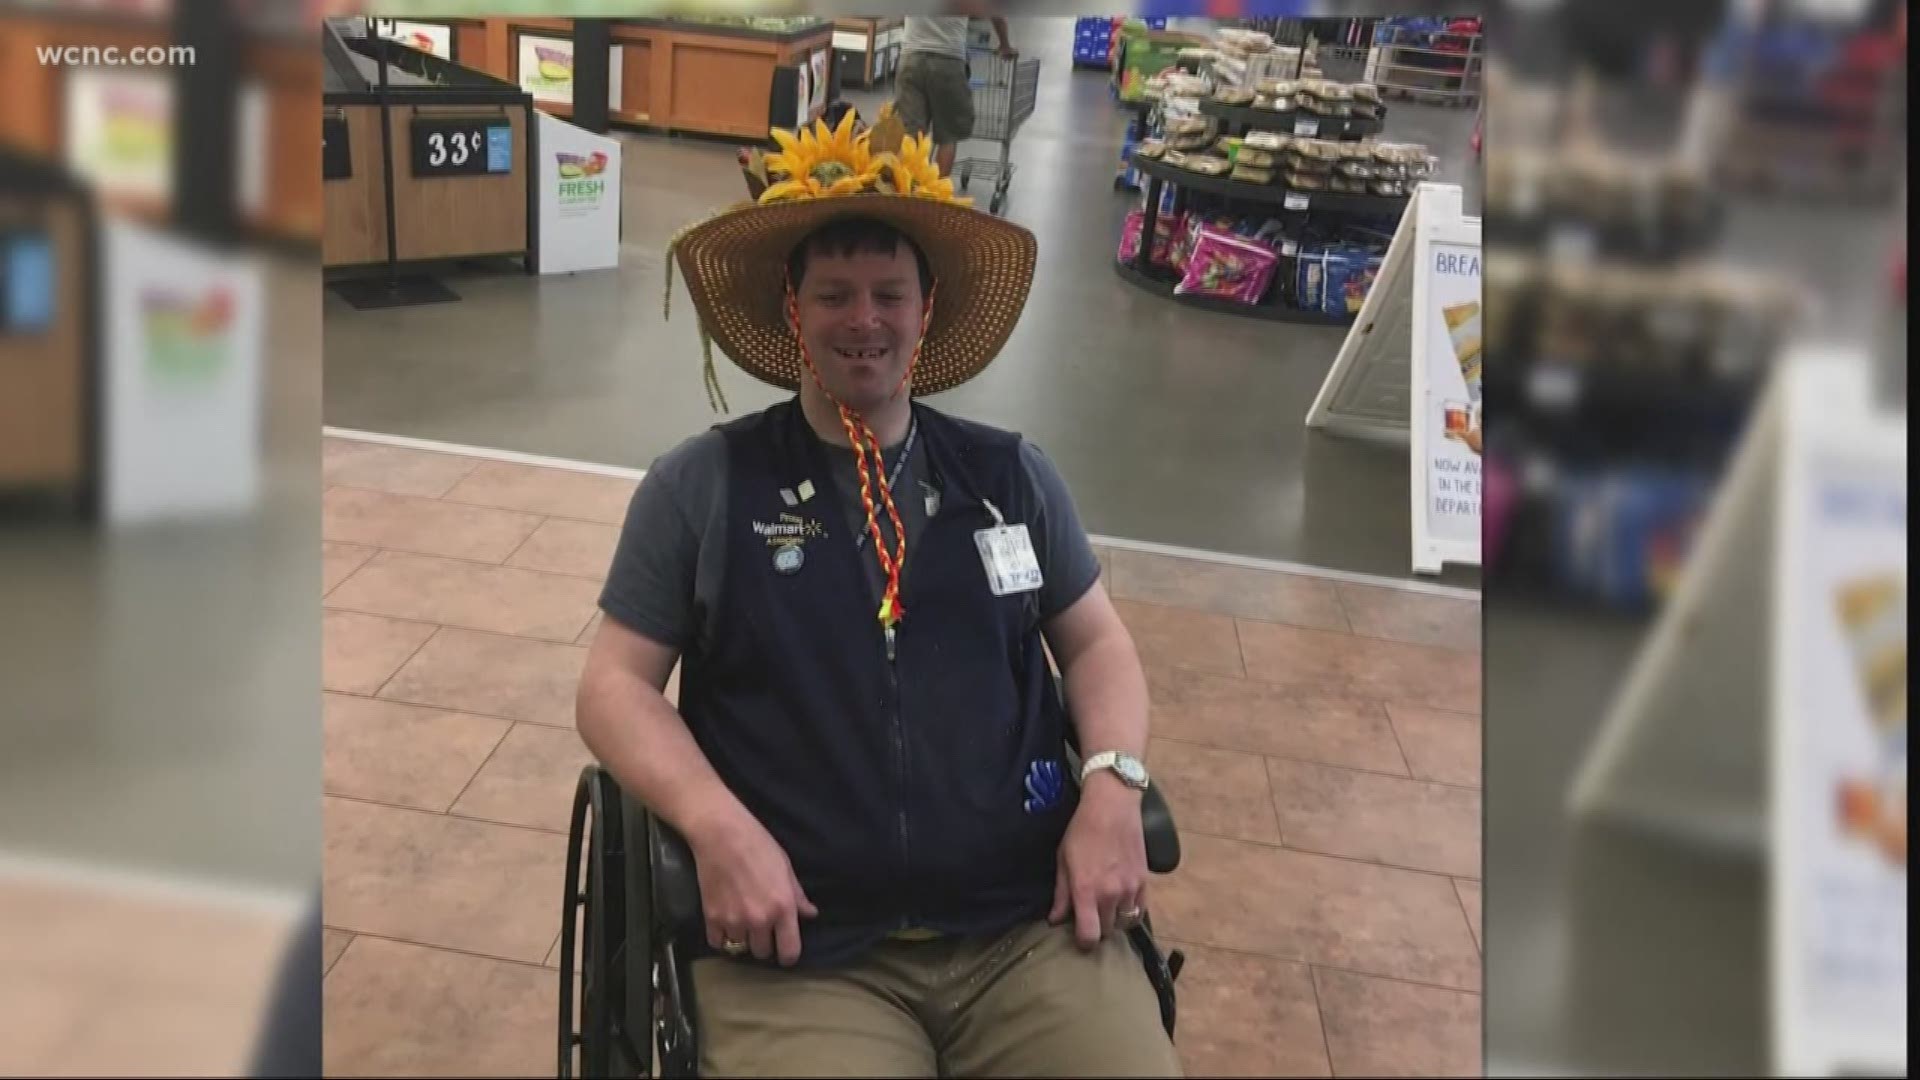 People are signing an online petition begging Walmart to let him keep his job, some writing they won't shop there if he goes. Walmart says they're extending the transition period while the store looks for a solution.